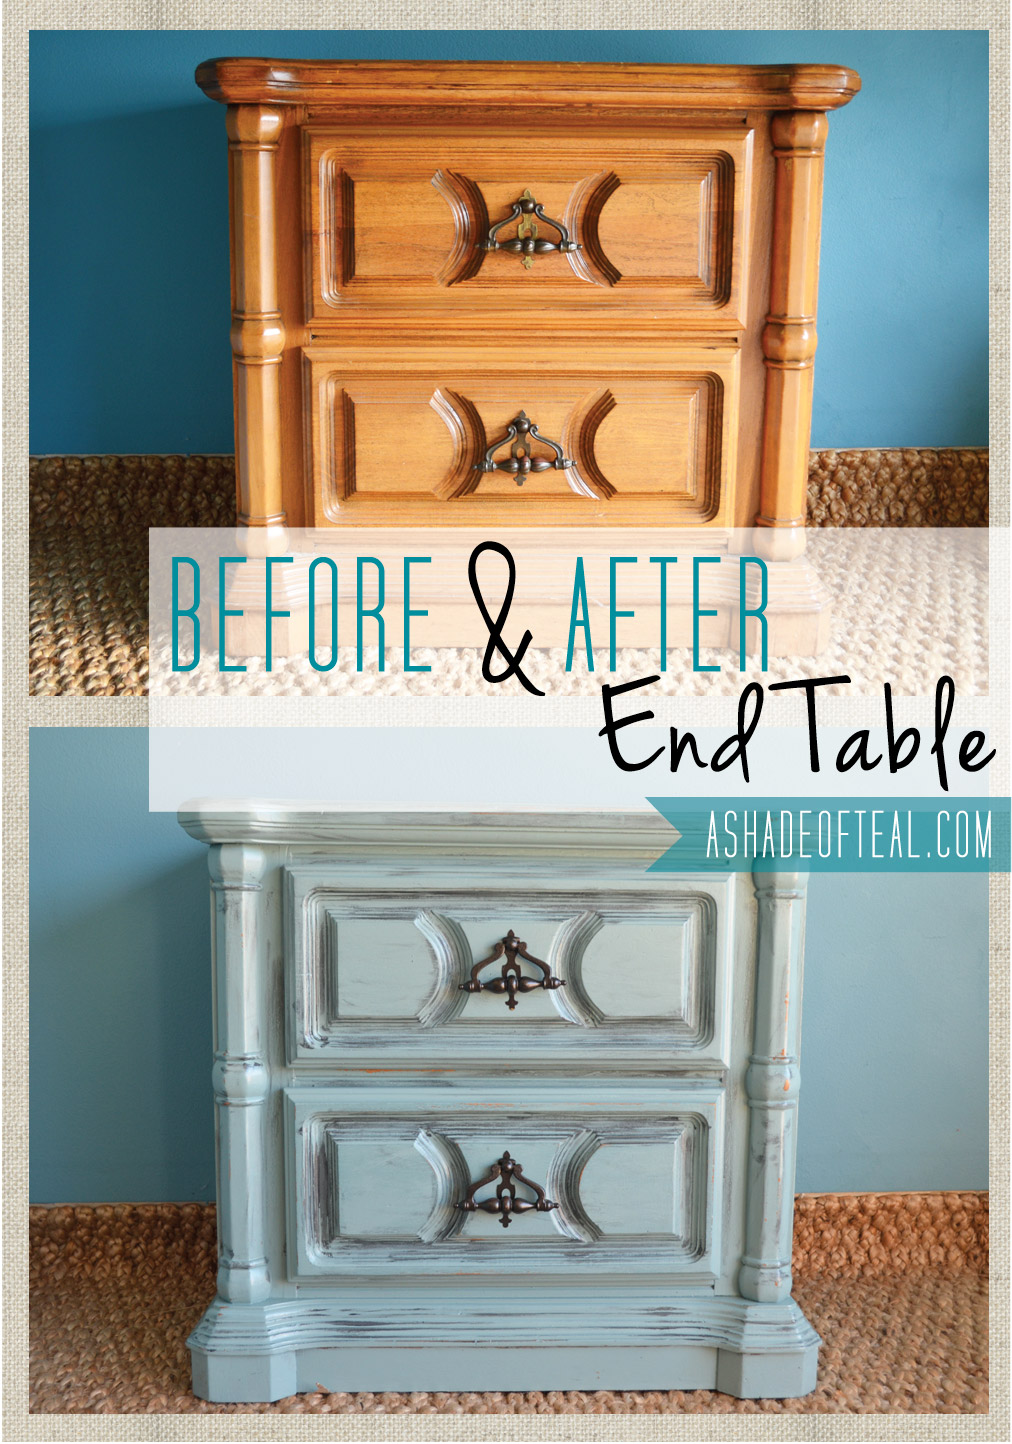 Before+After: End Table